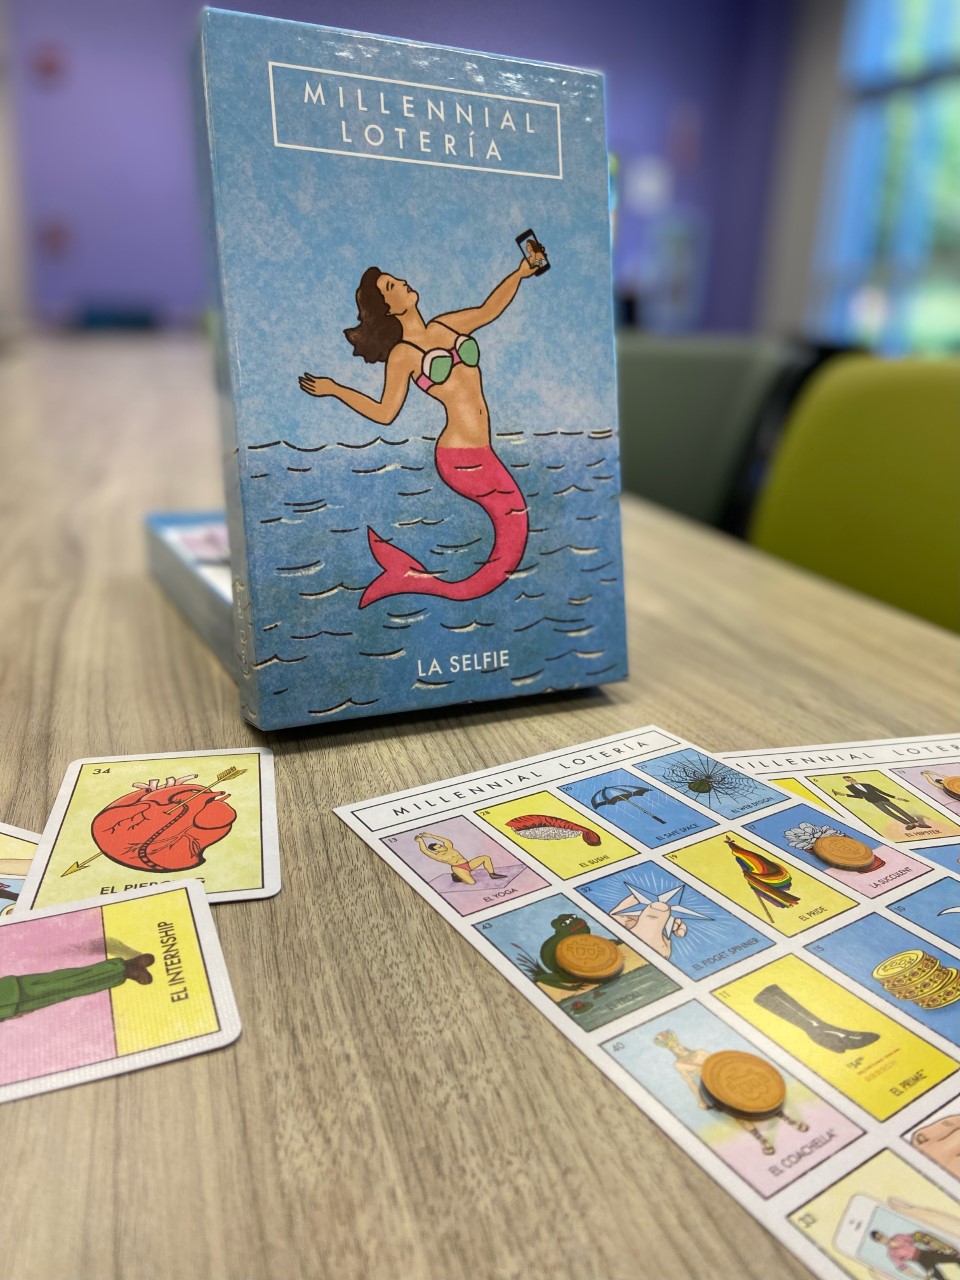 It shows the game Millennial Loteria in the back, with playing cards and boards in the foreground.